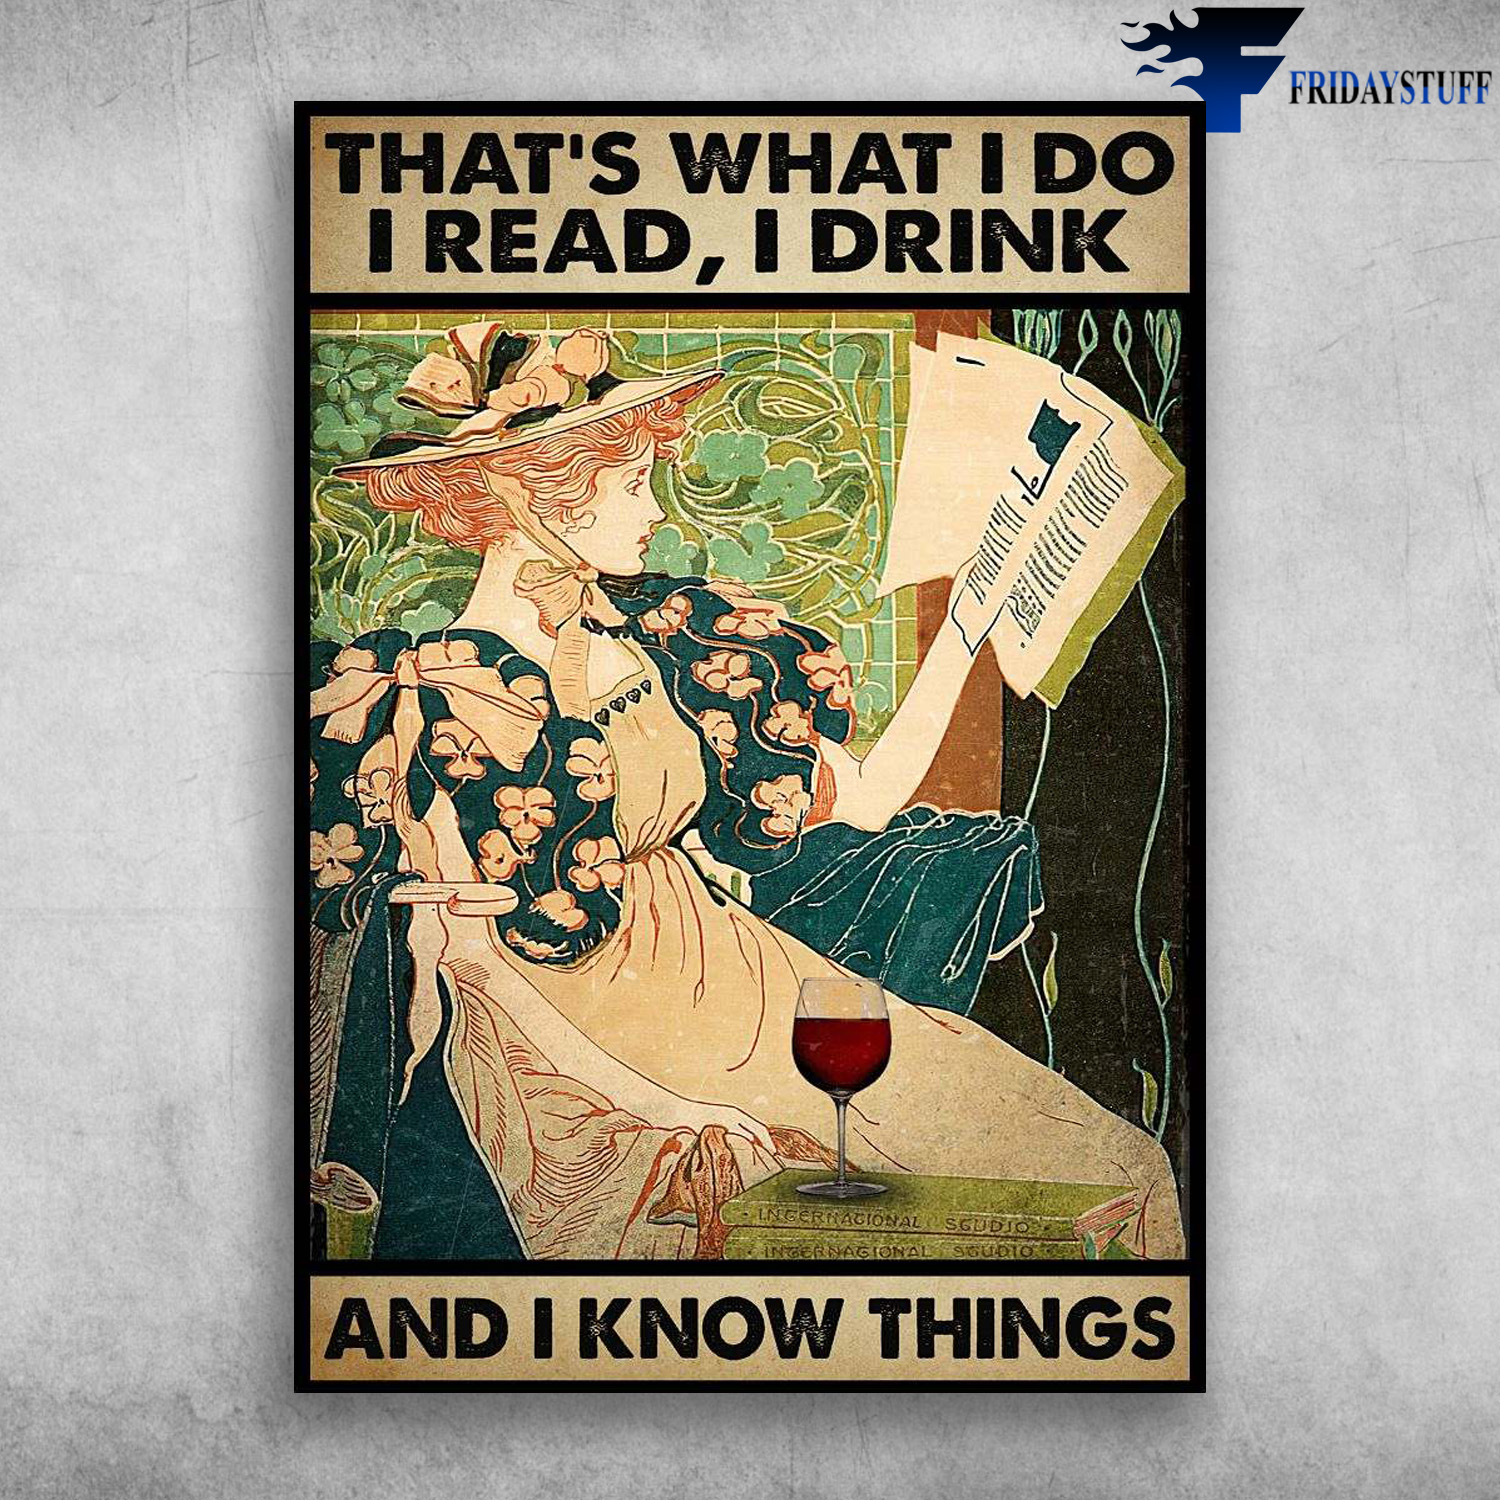 Book And Wine, Girl Reading - That What I Do, I Read, I Drink, And I Know Things